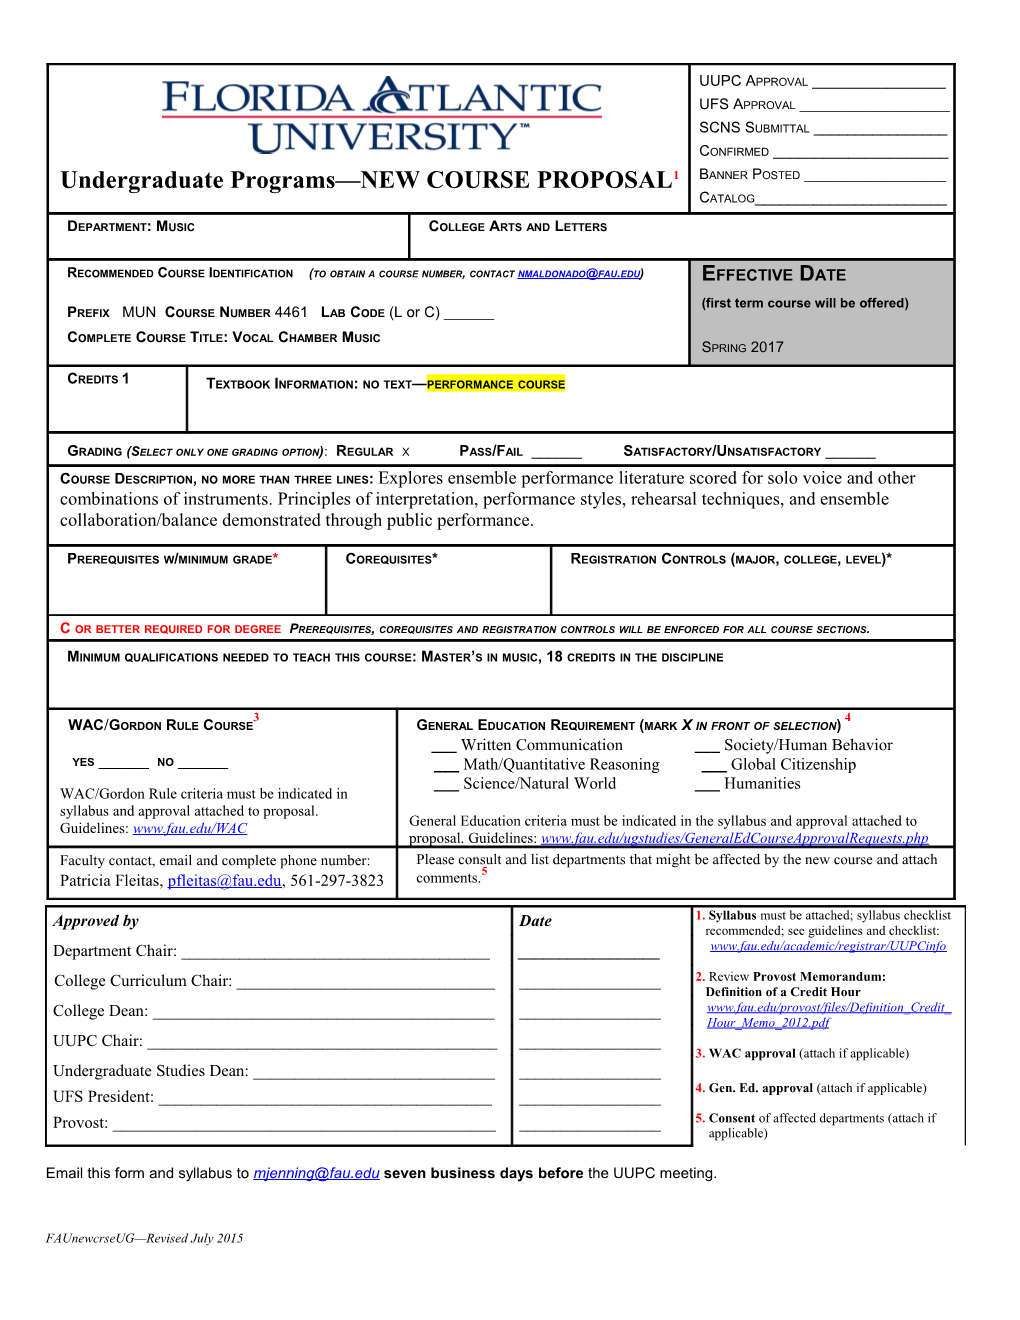 CD037, Course Termination Or Change Transmittal Form s5